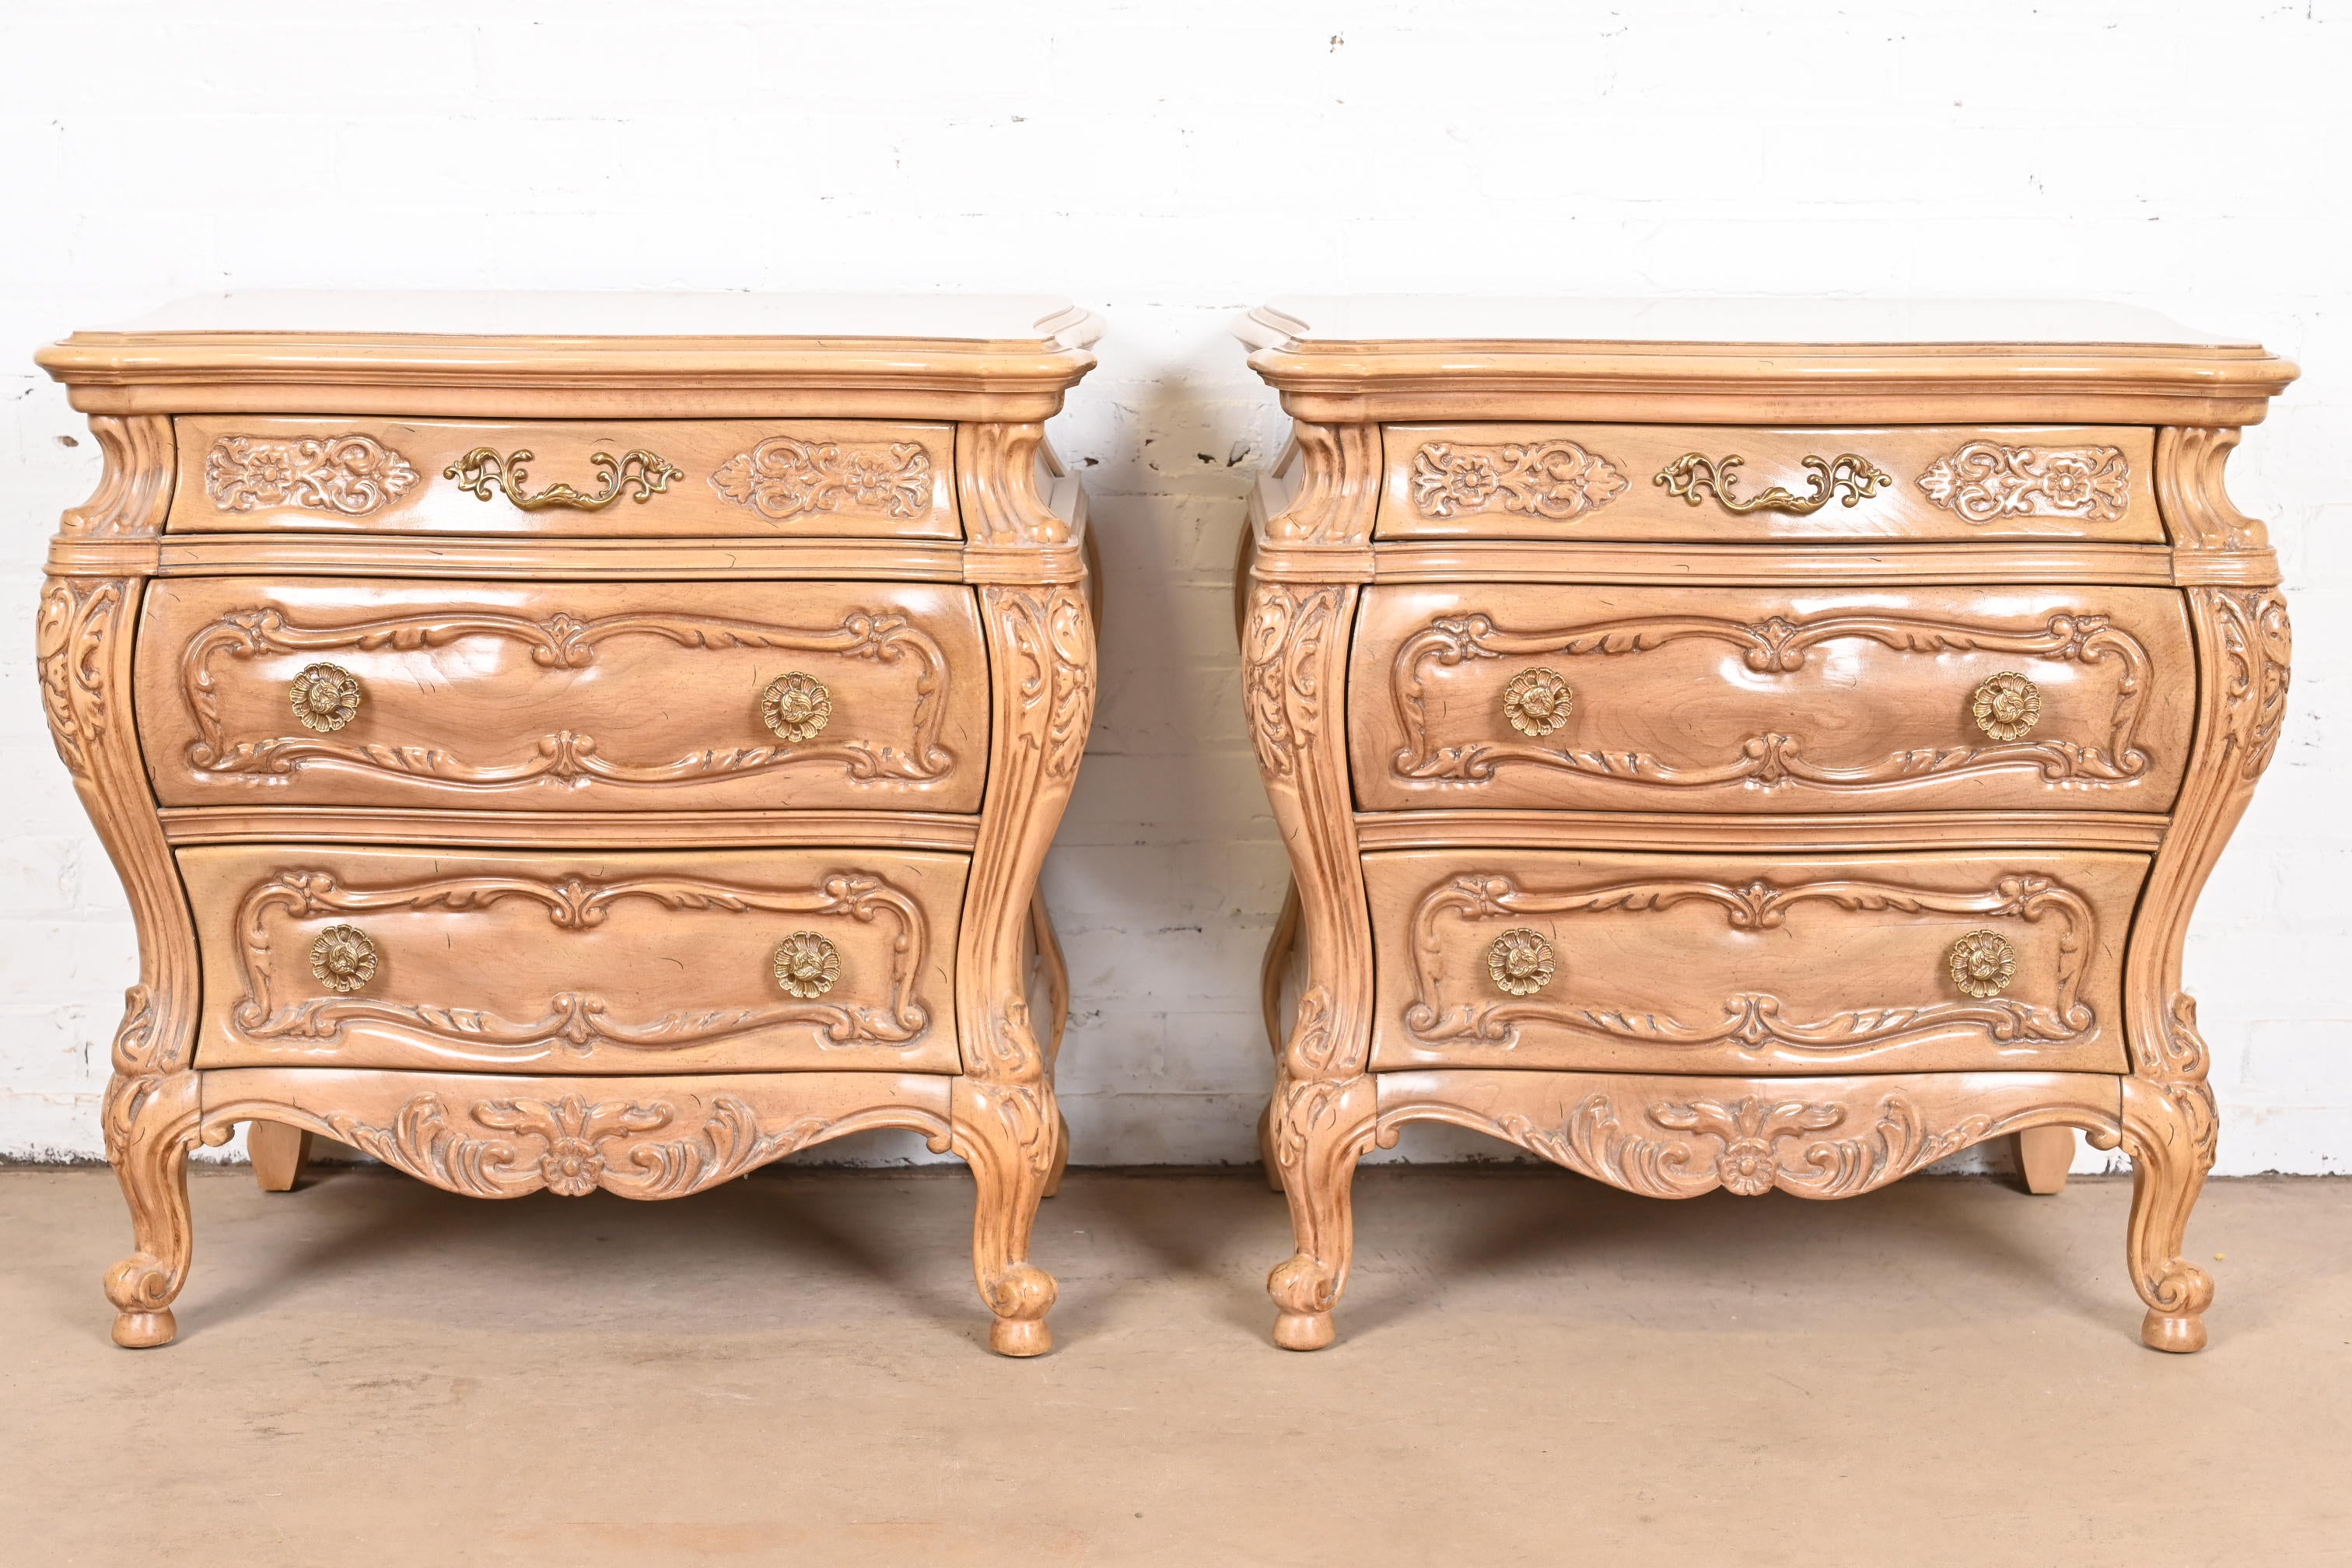 A beautiful pair of French Provincial Louis XV style bombay form nightstands, chests of drawers, or commodes

In the manner of Grosfeld House

USA, Circa 1960s

Carved bleached walnut, with original brass hardware.

Measures: 27.5